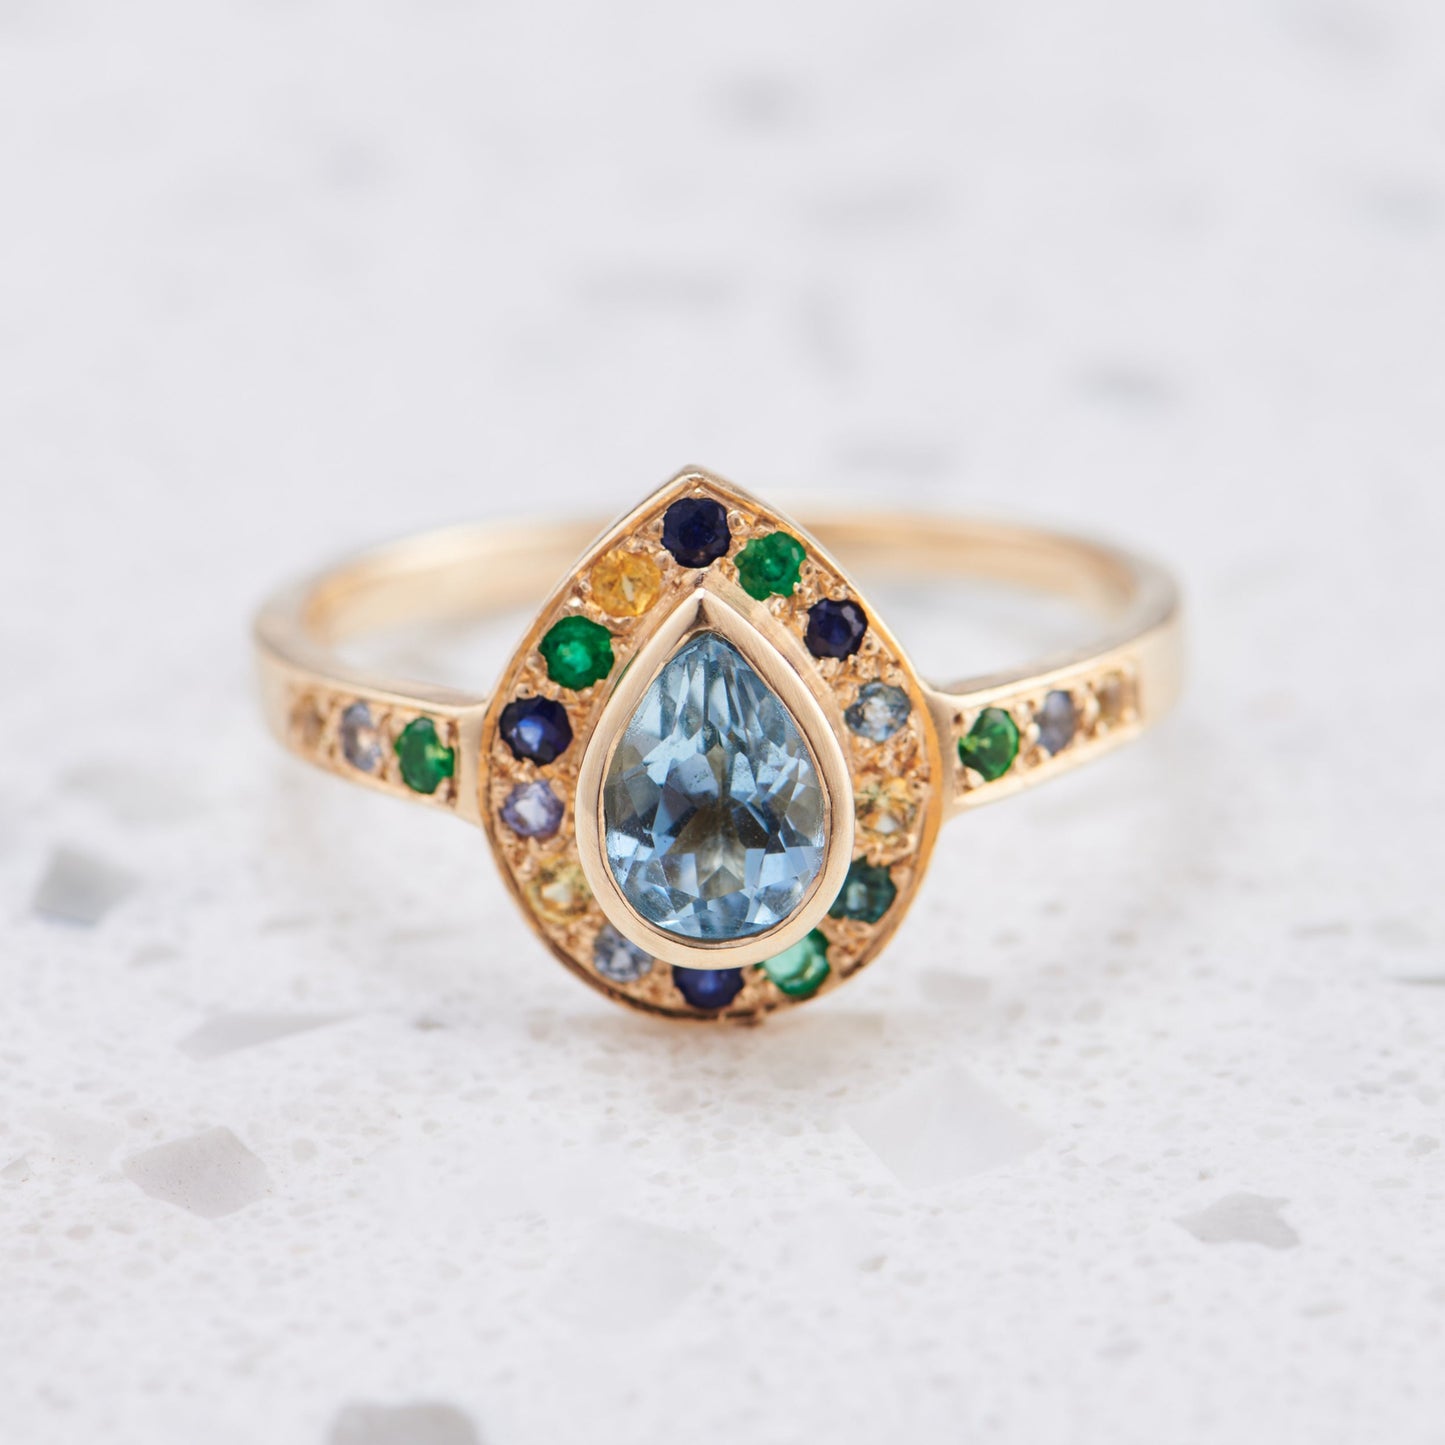 Aquamarine Theodoric Pebble Ring in 18ct Yellow Gold, Size S (In Stock)